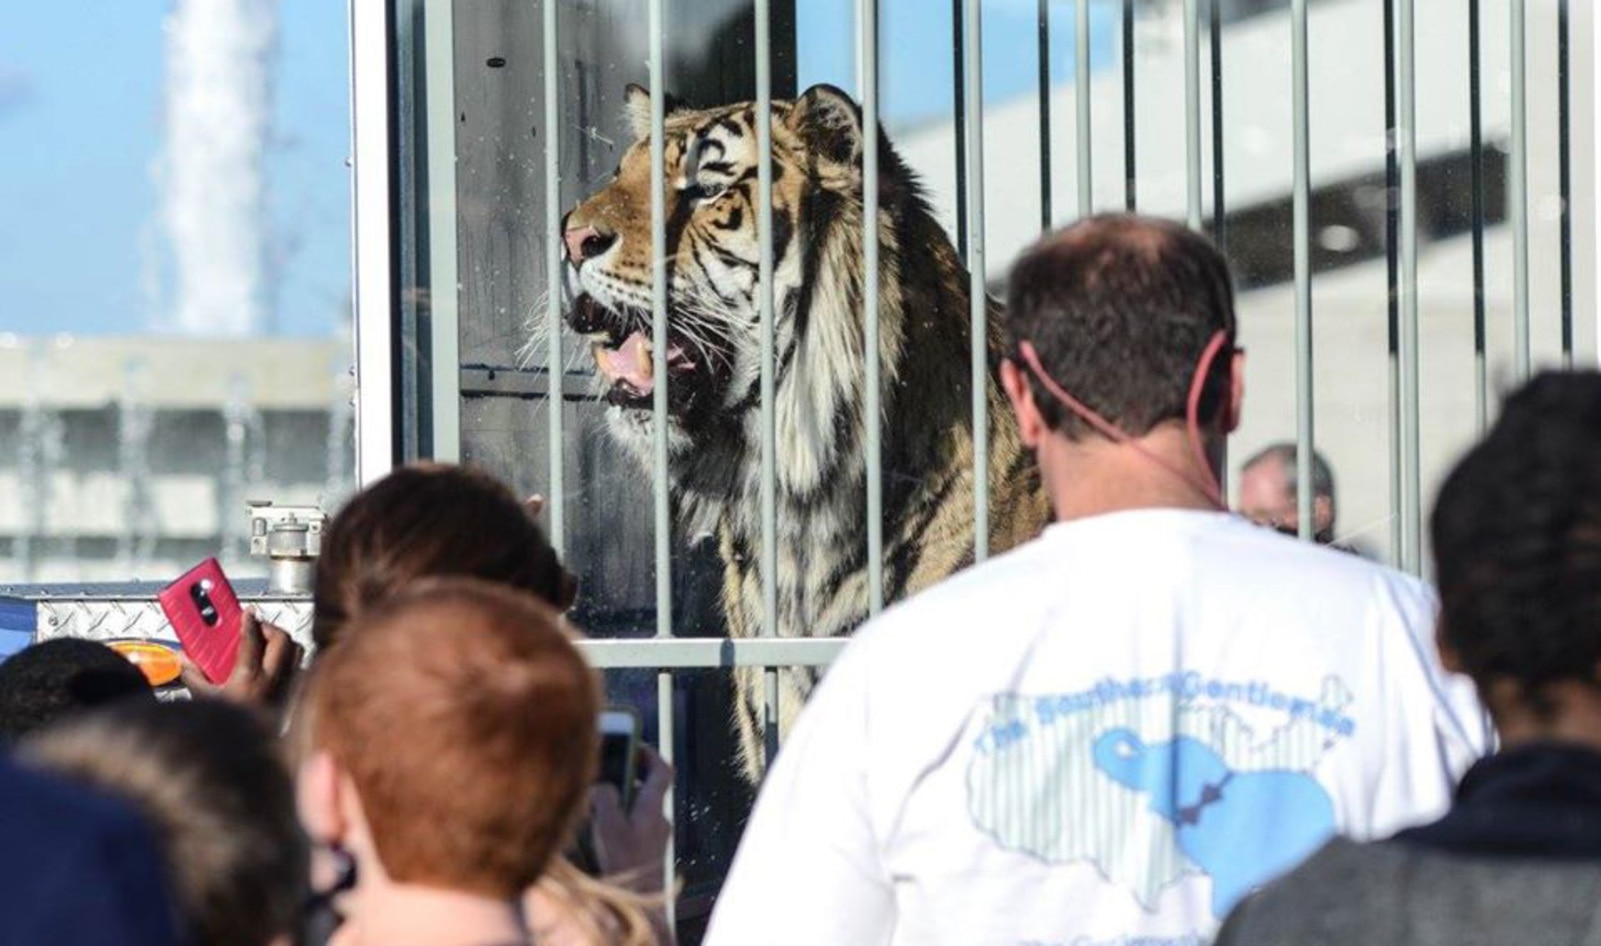 Nearly 10,000 Sign Petition to Liberate Caged Tiger Mascot From University of Memphis&nbsp;&nbsp;